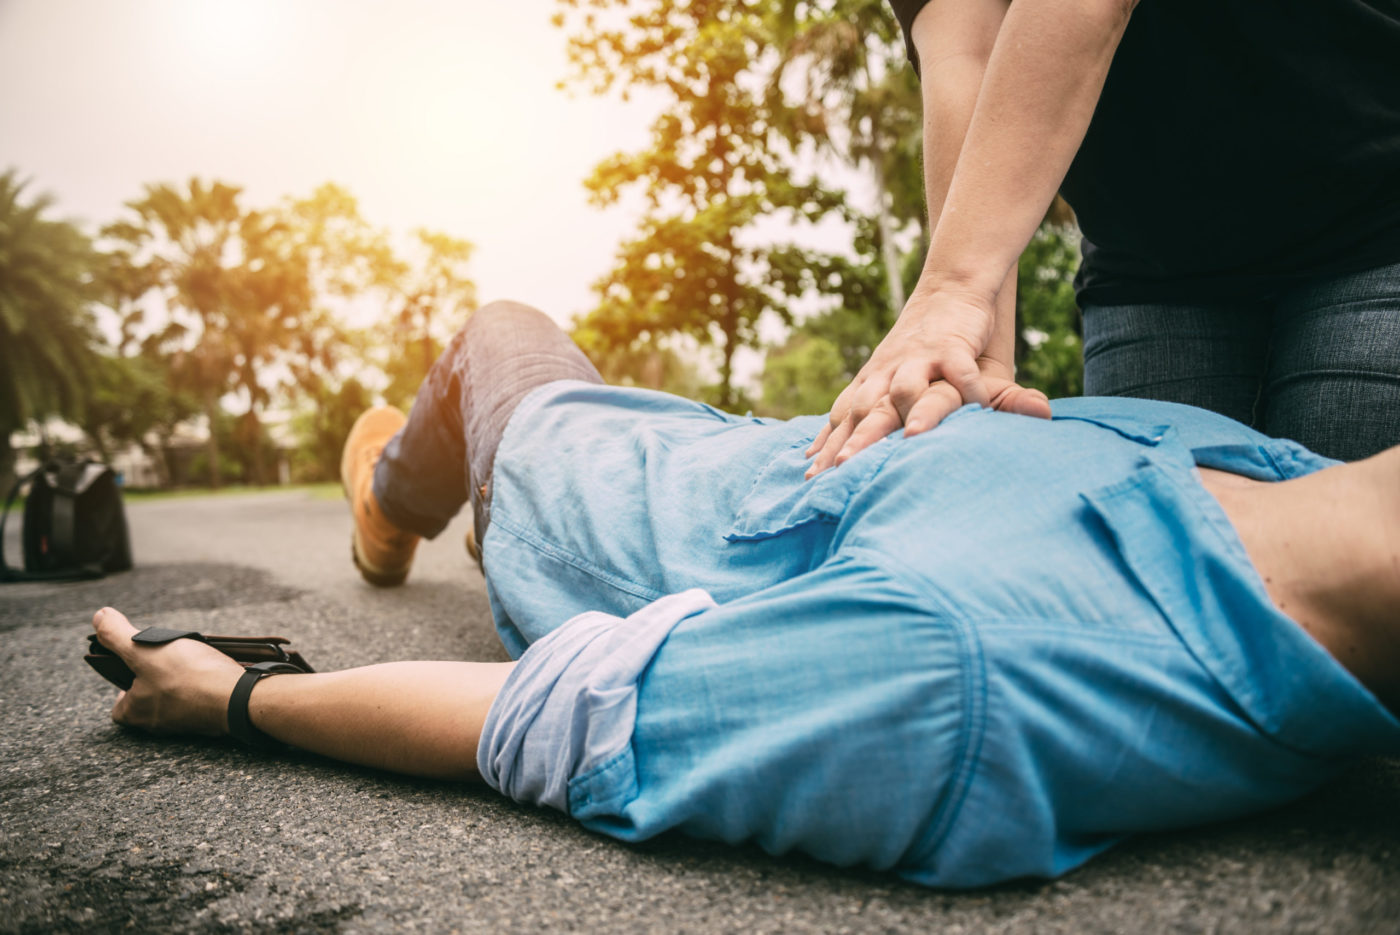 9 Reasons Basic First Aid Knowledge Is Essential